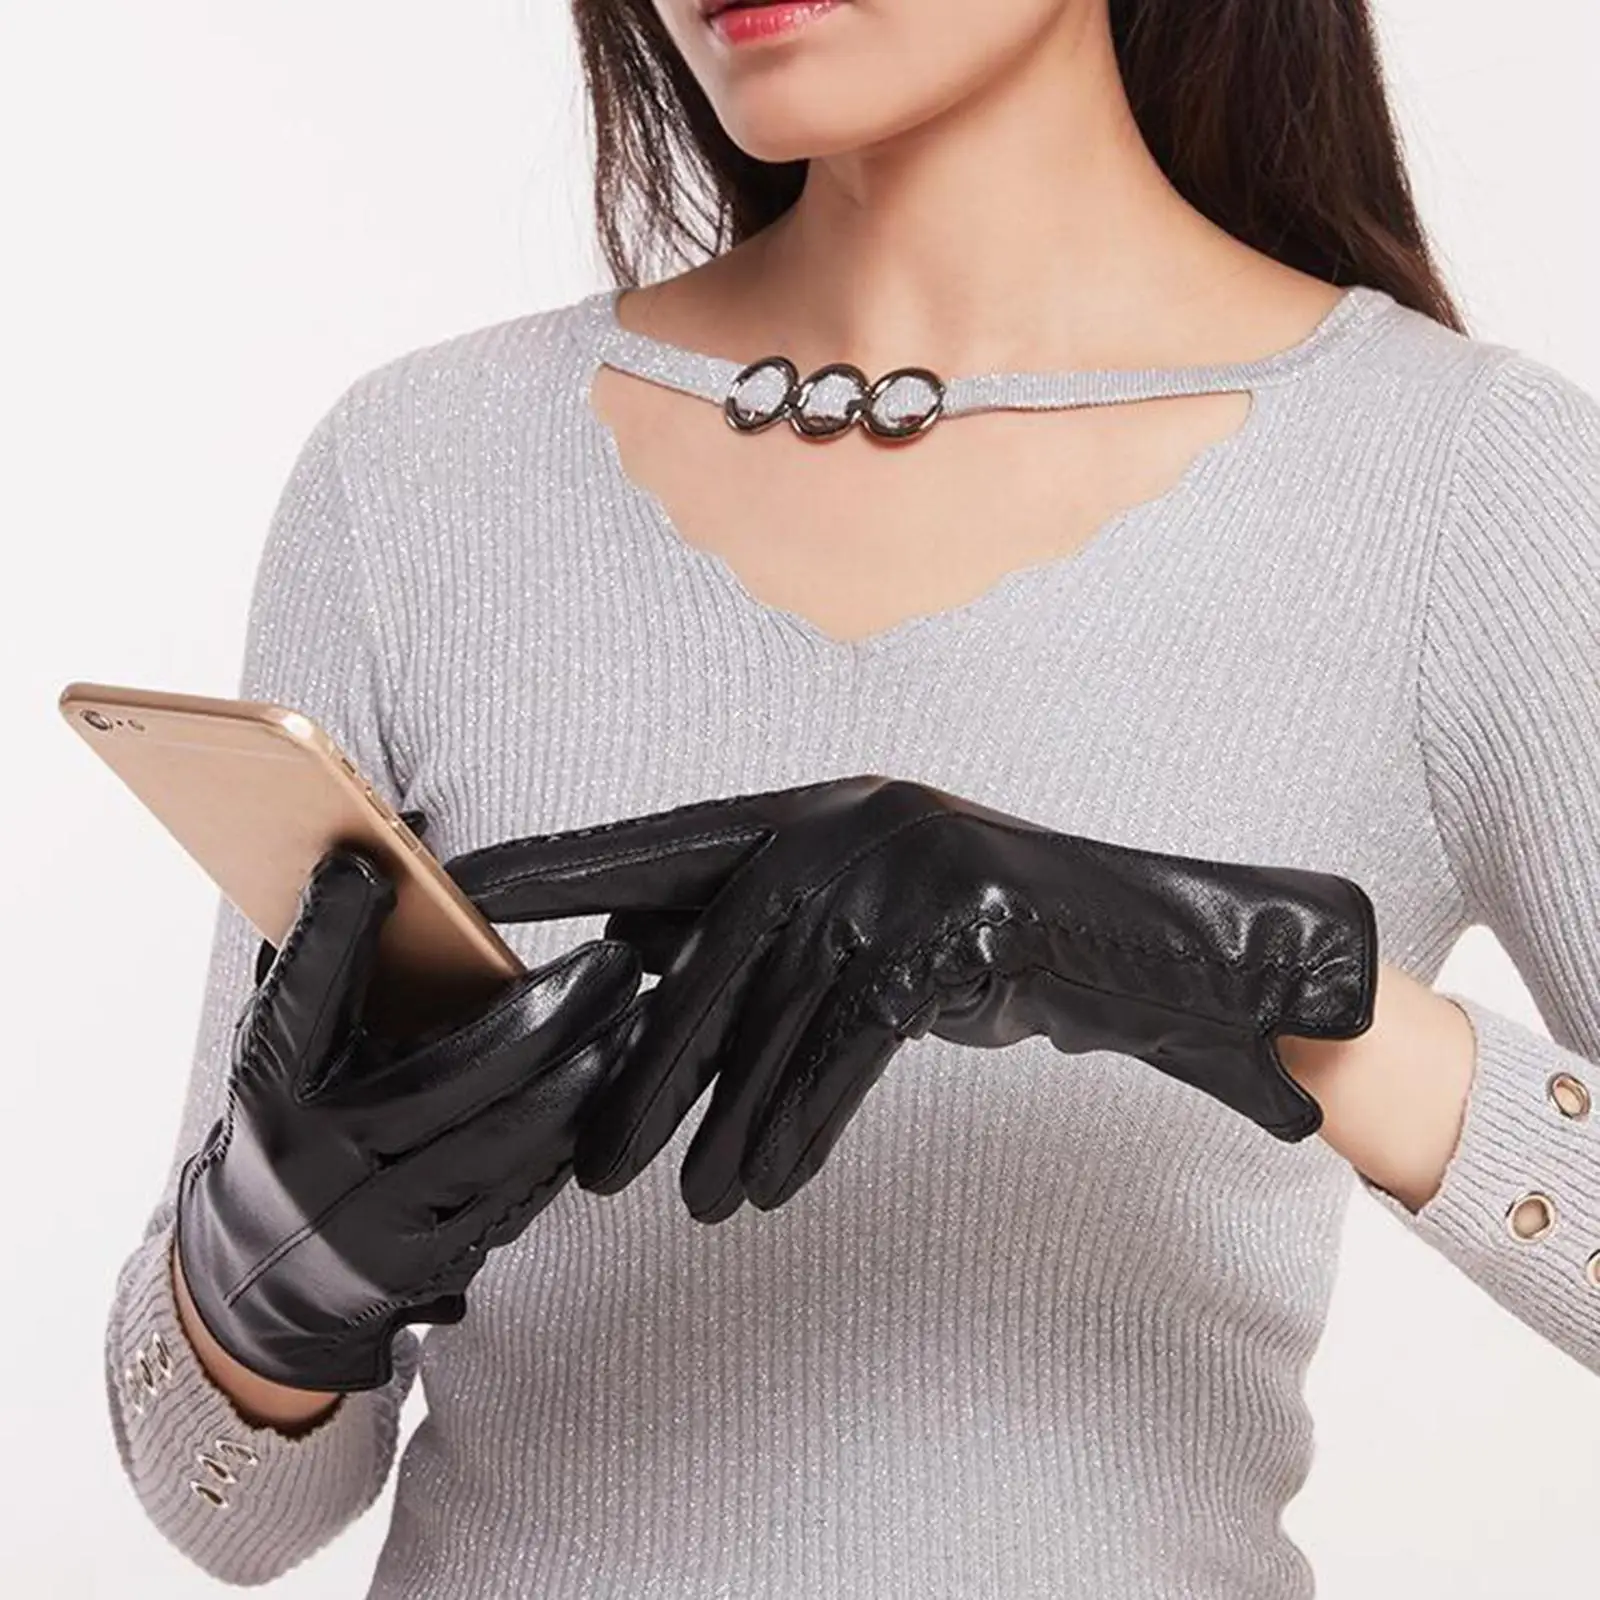 Women Winter Warm Gloves Touch Screen for Cycling Skiing Driving Riding Outdoor